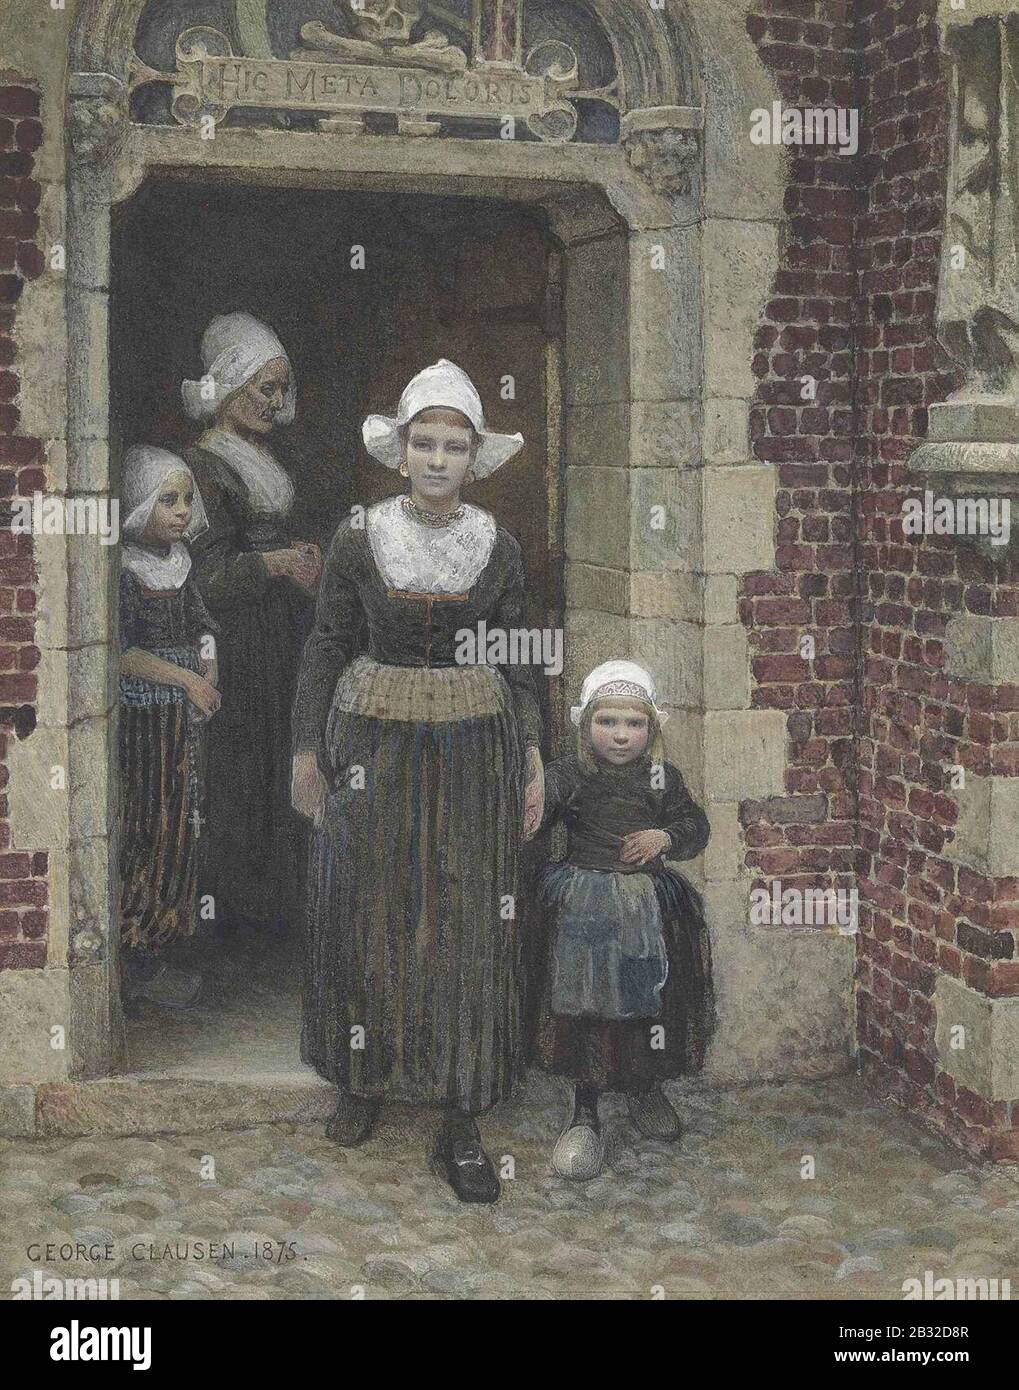 George Clausen - Coming out of church, Vollendam, Zuider Zee. Stock Photo